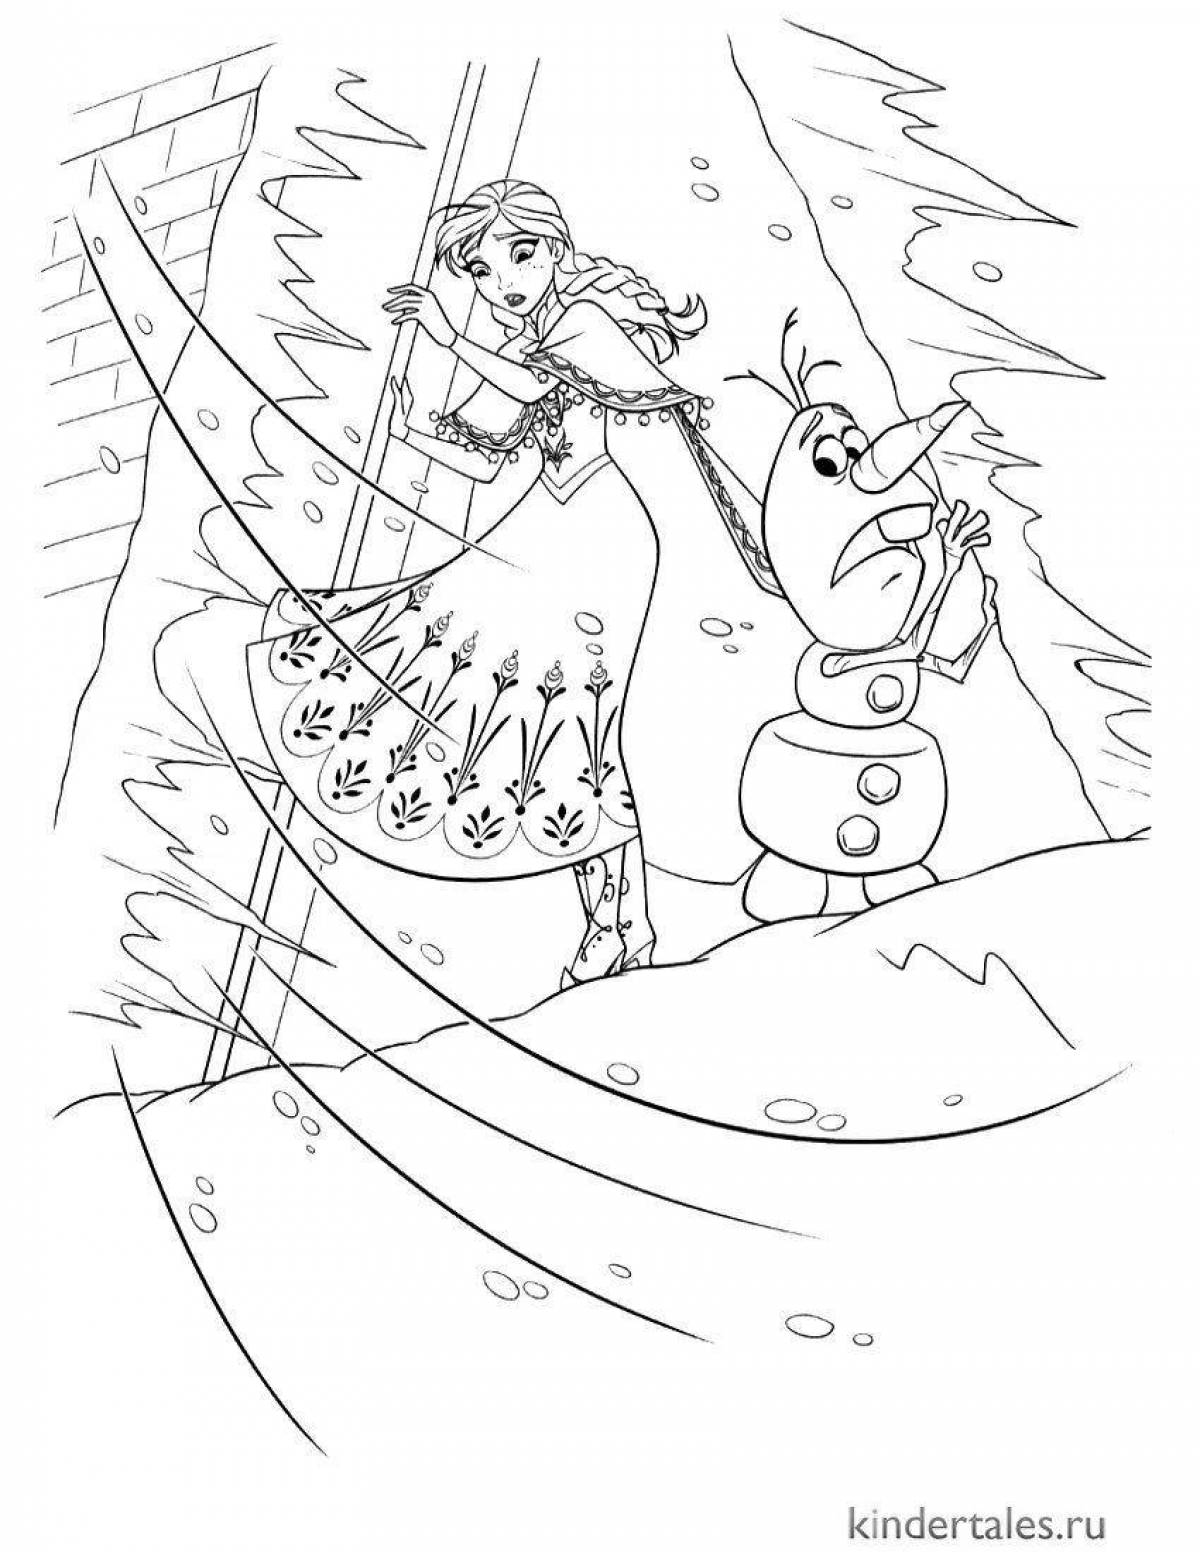 Playful blizzard coloring page for kids